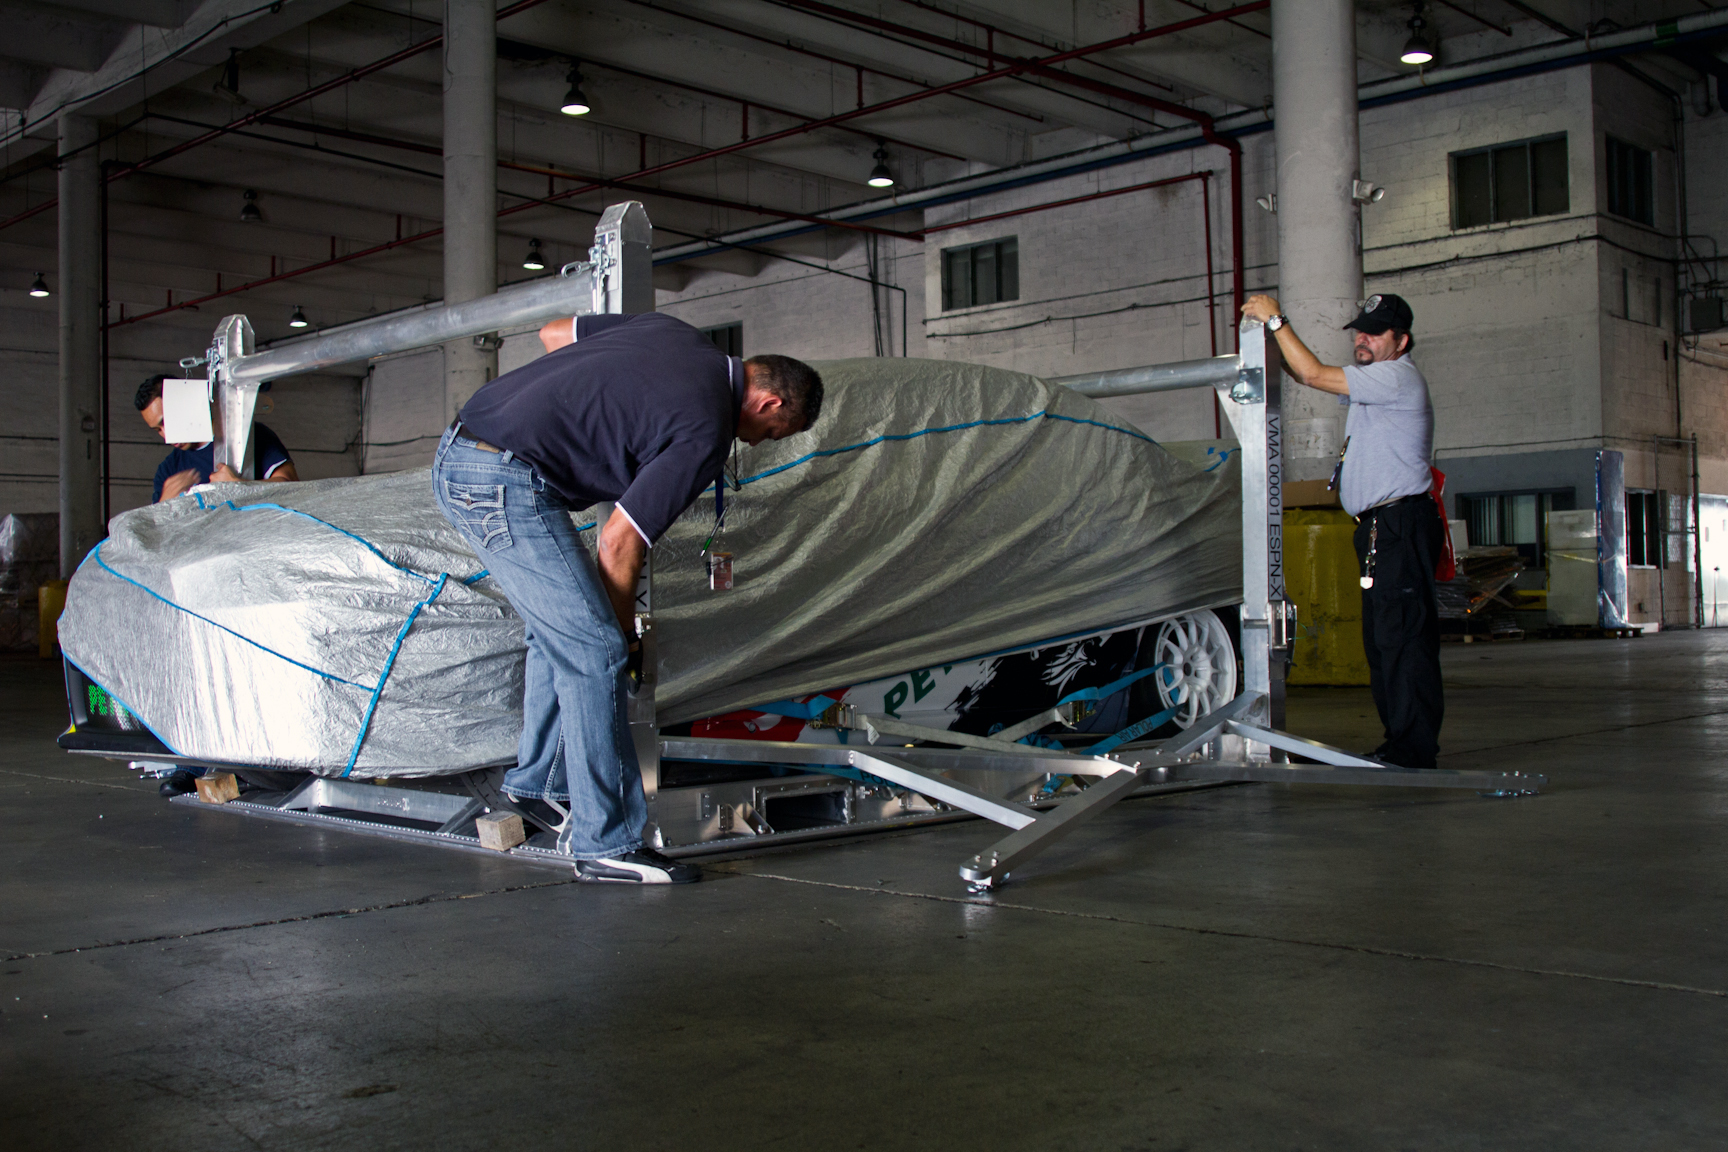 The crew finishes up the assembly of the bottom rack, preparing to stack the X Games official pace car on top.